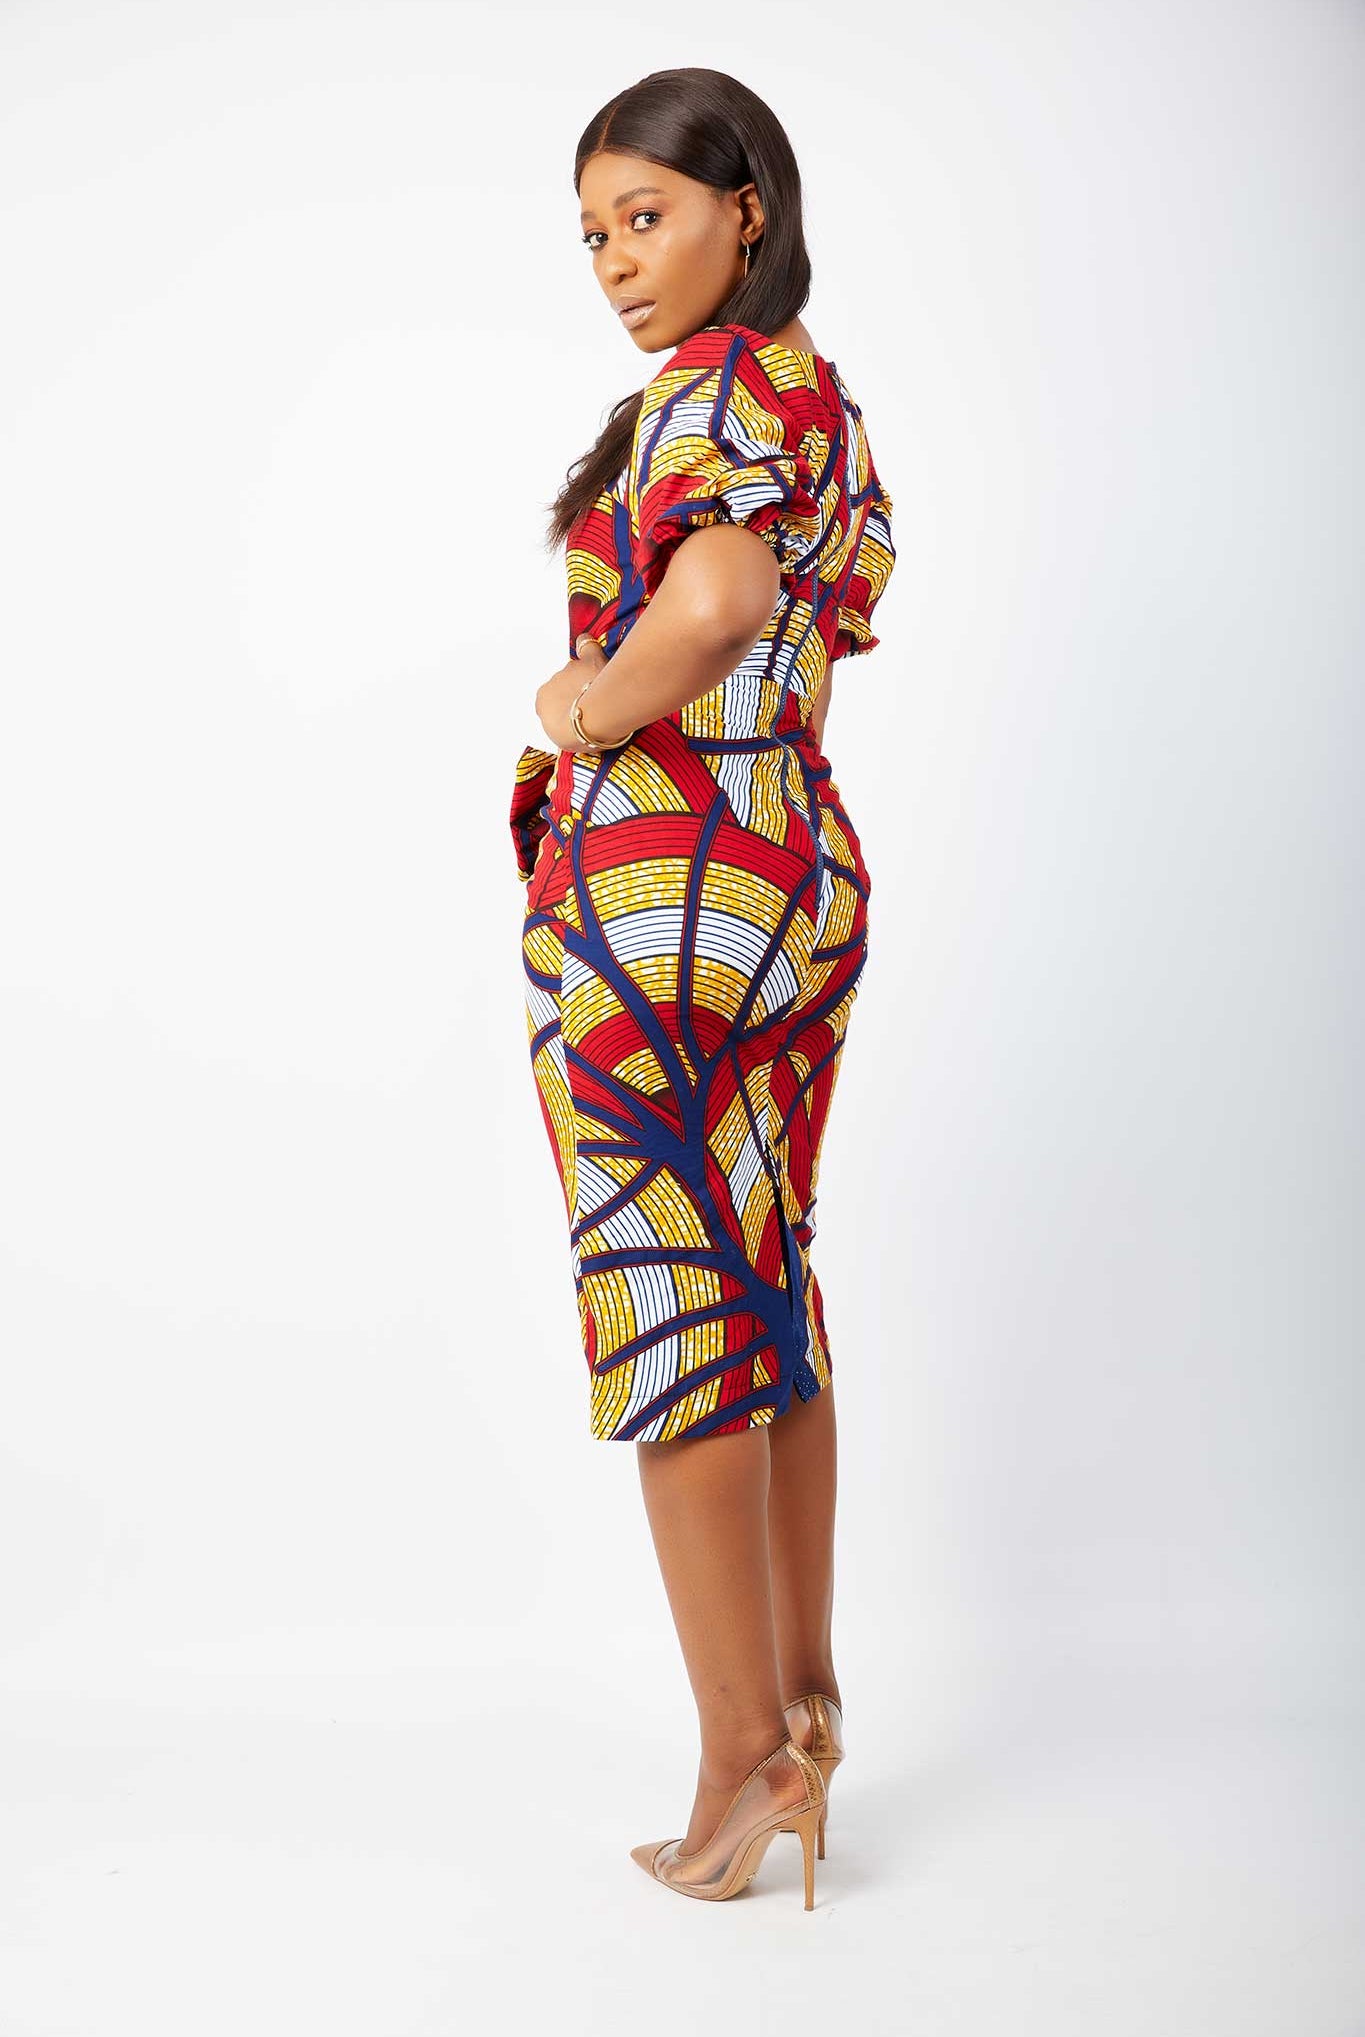 African print clothing UK | African print apparel | African Print clothing online | Trendy African clothing store | Buy African dress